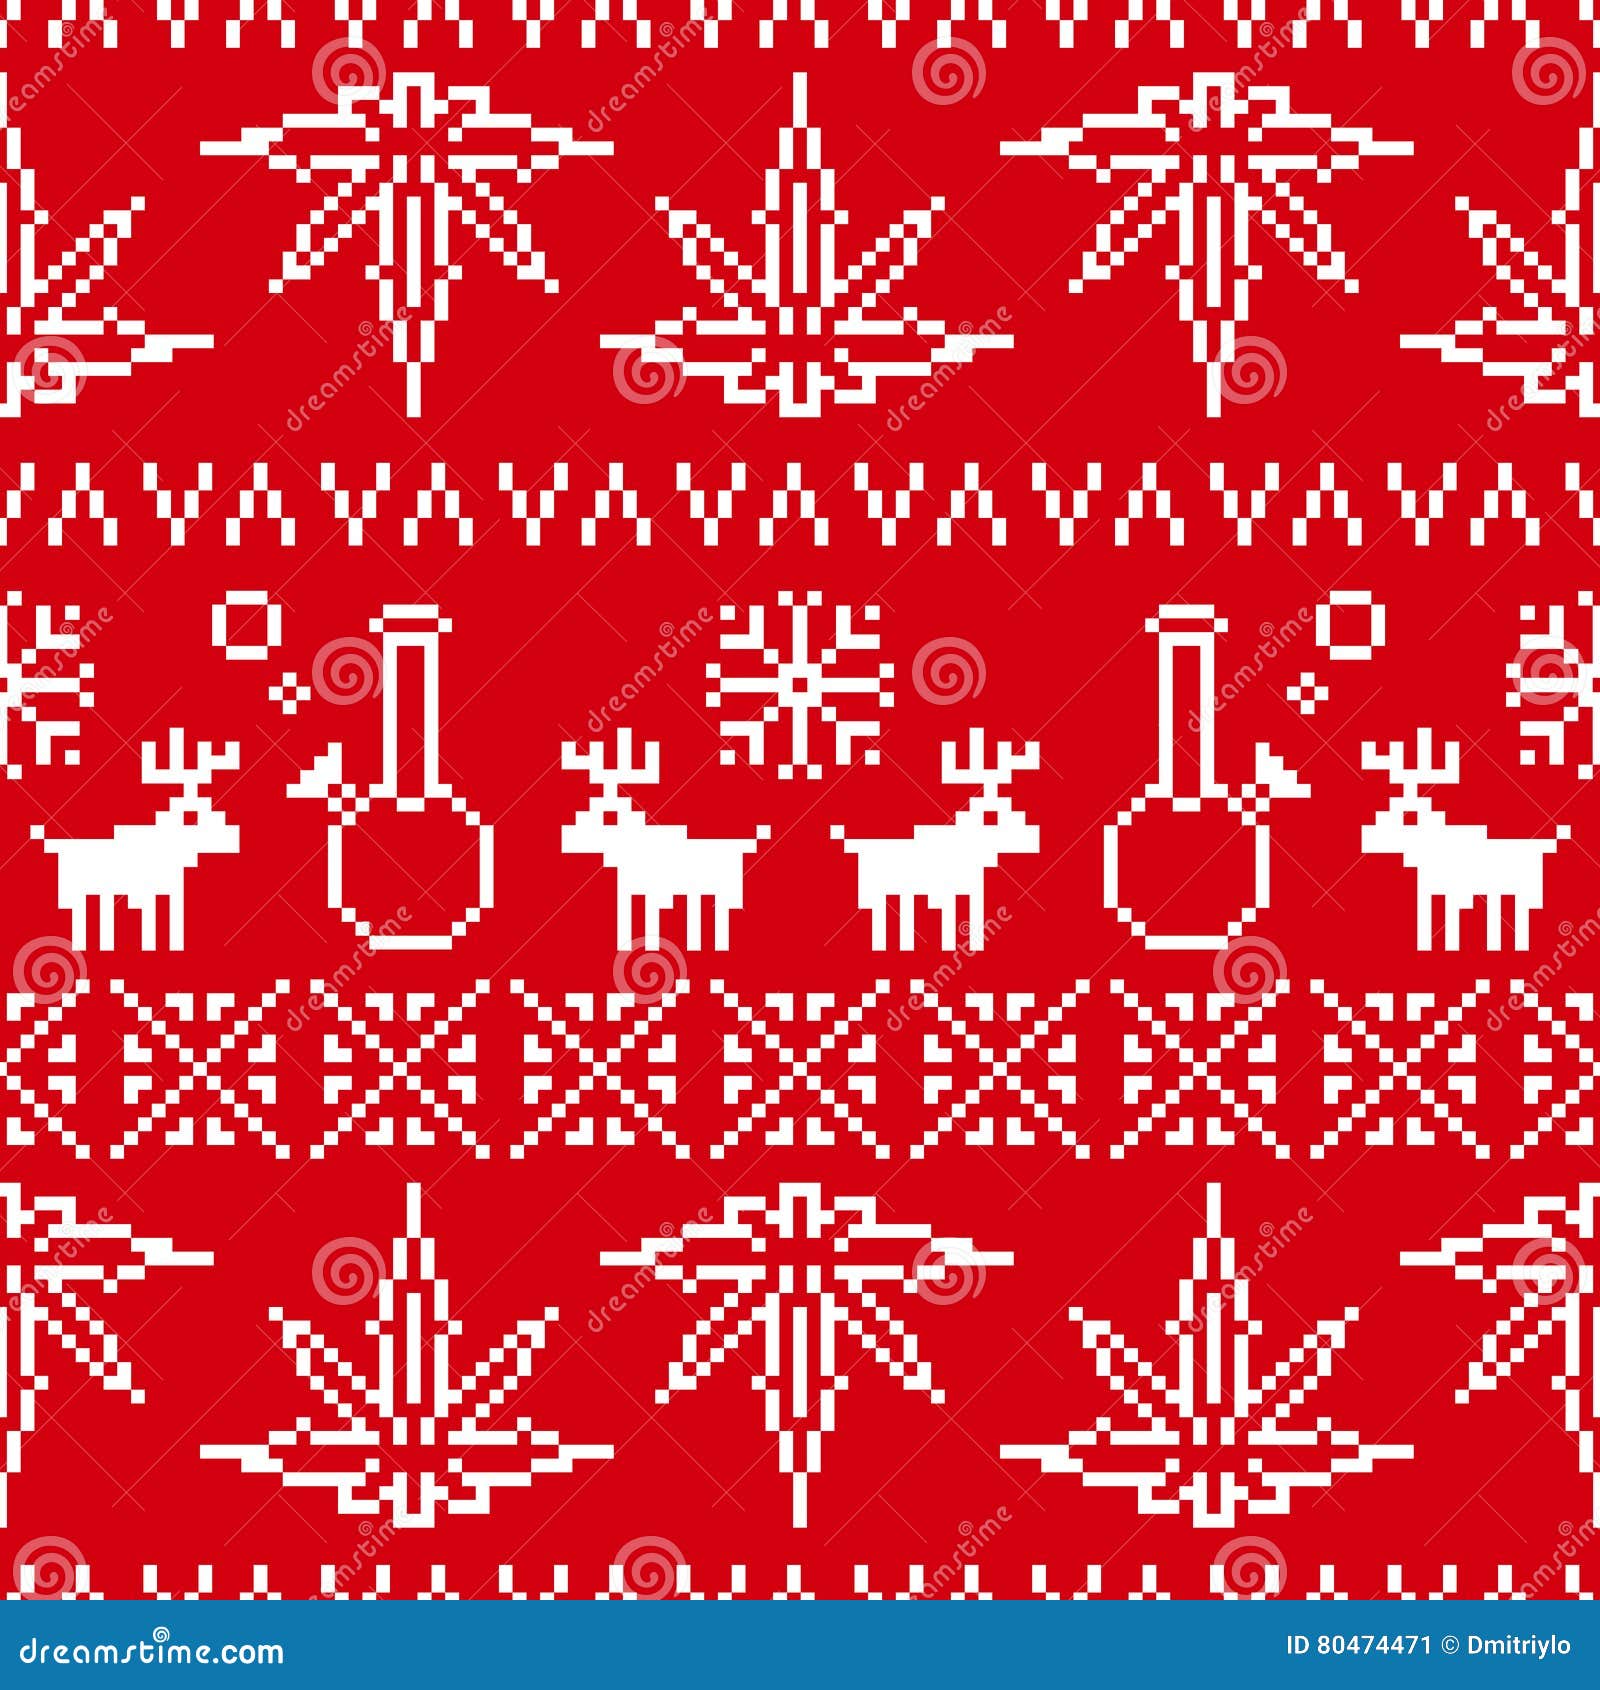 Pixel Art Christmas Weed Seamless Vector Background Red